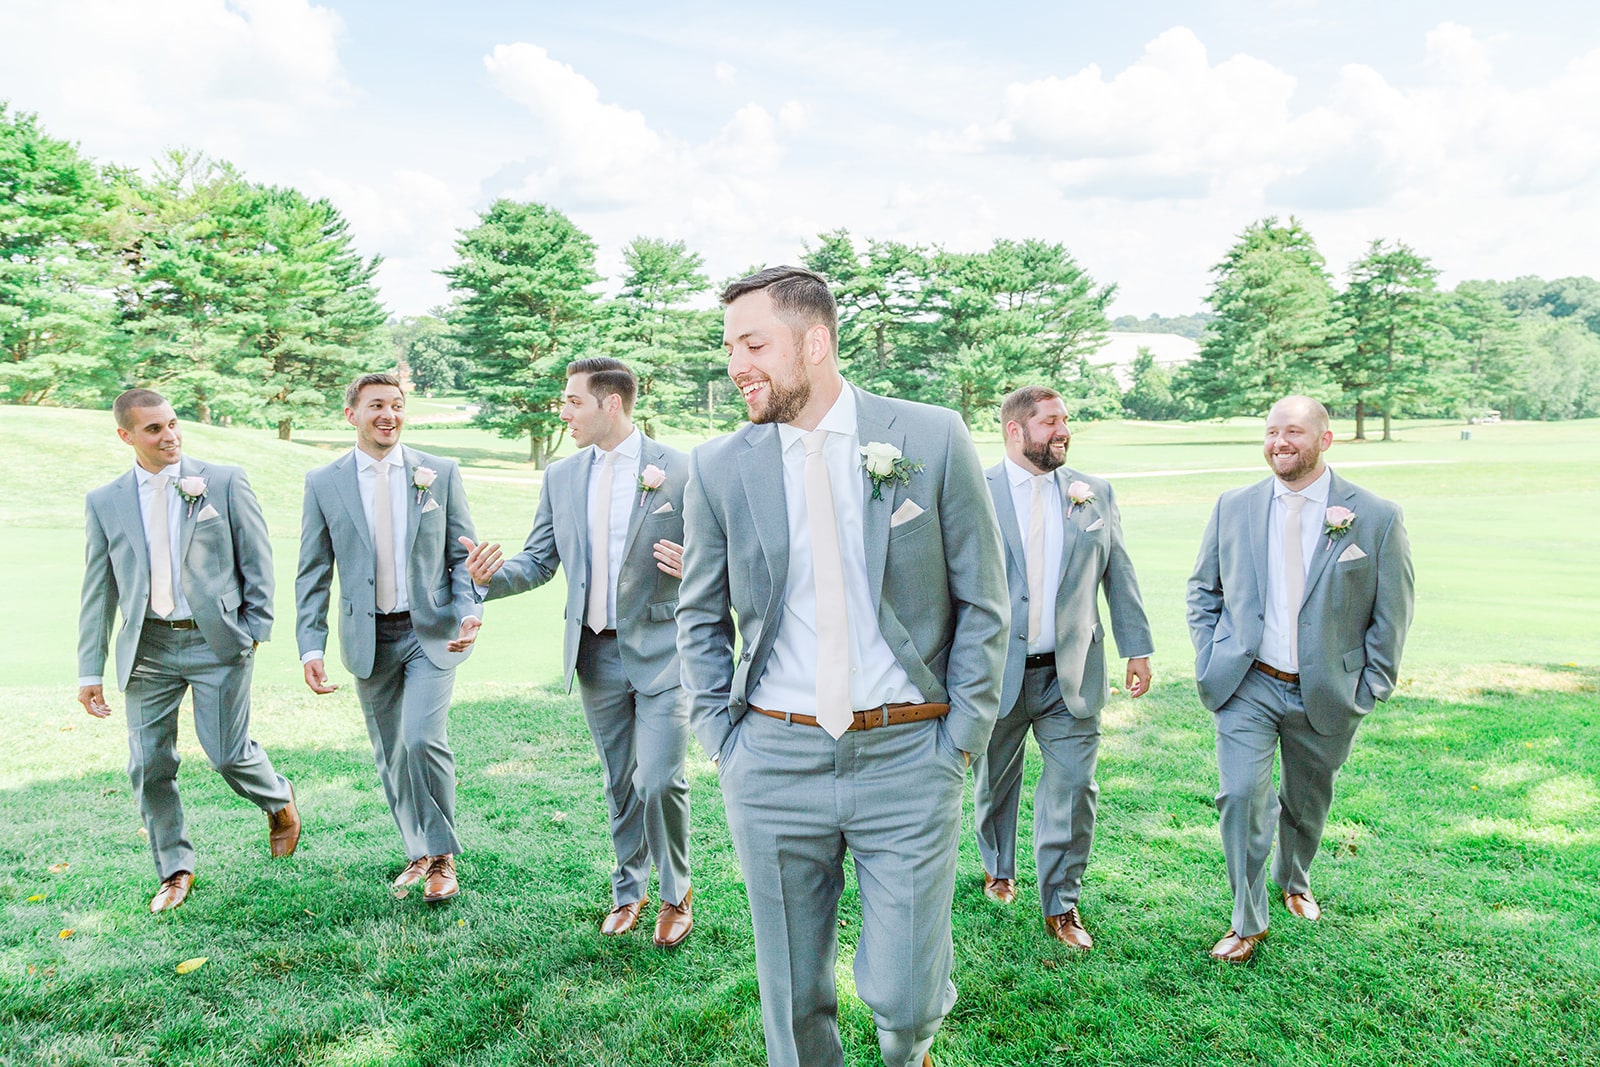 Groomsmen walking together in a golf course fairway towards the wedding. Photo by Chesapeake Charm Photography